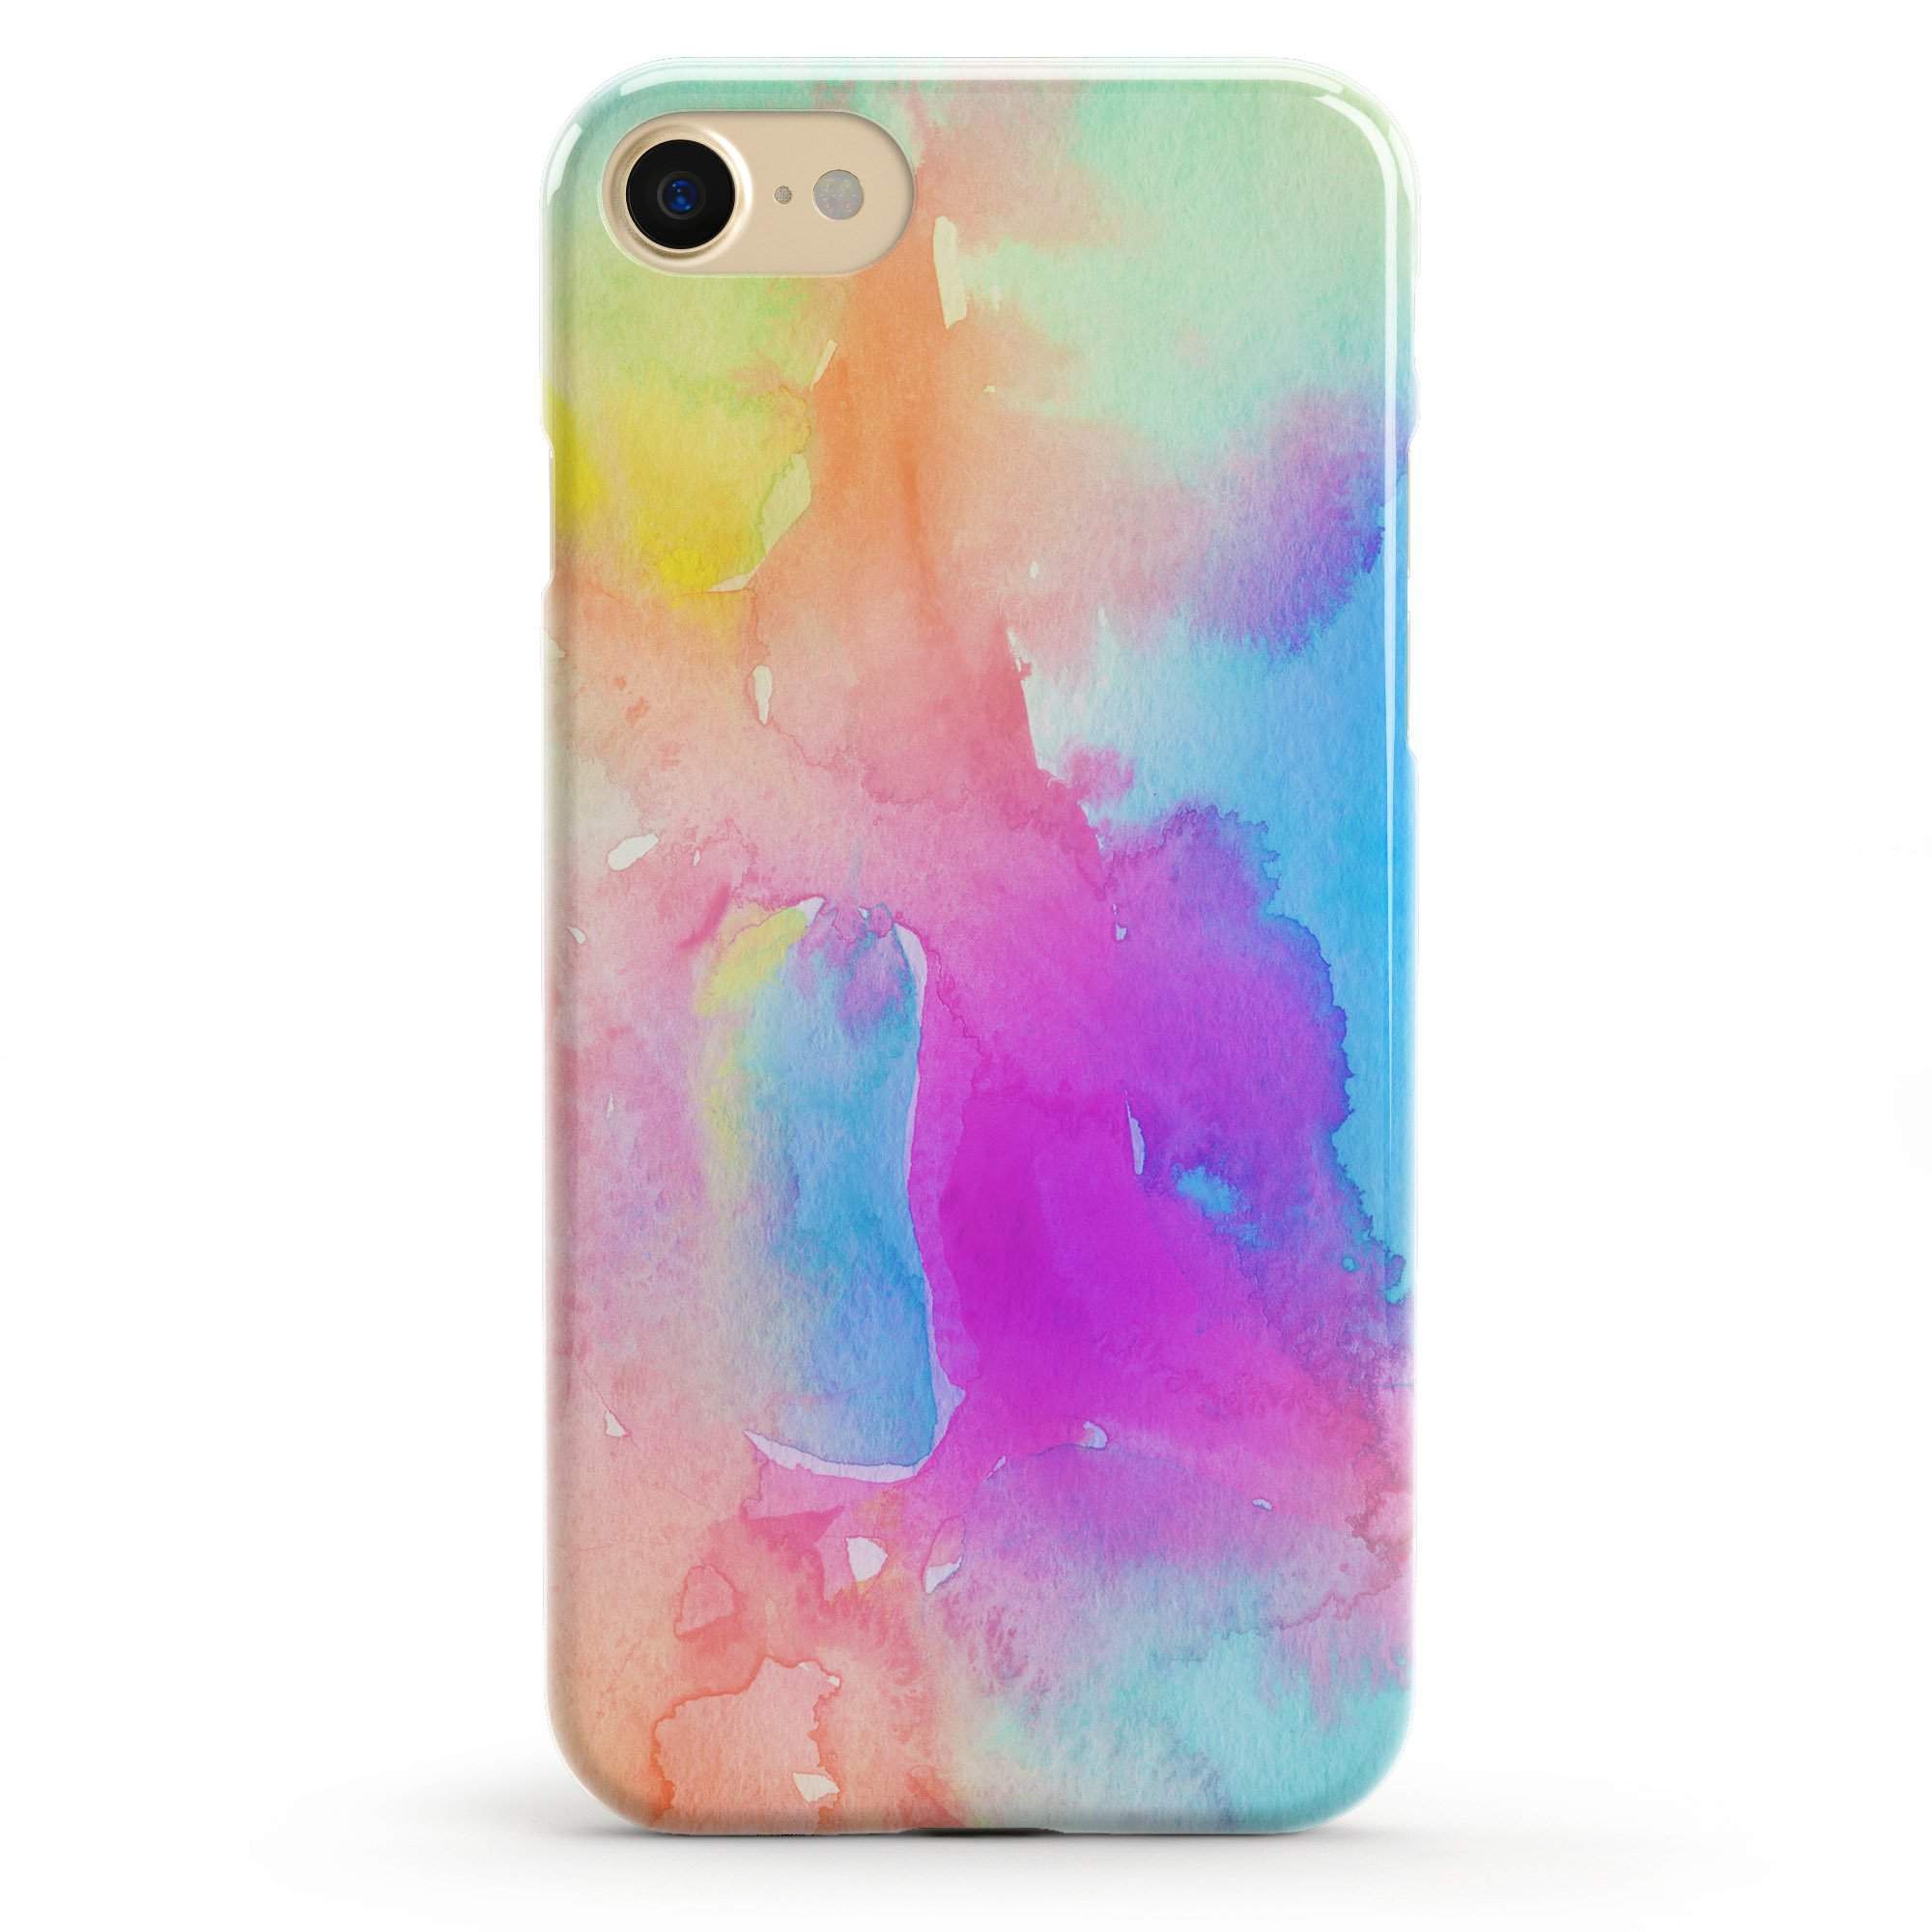 Cute & Pretty Phone Cases and Covers for Girls | Casely